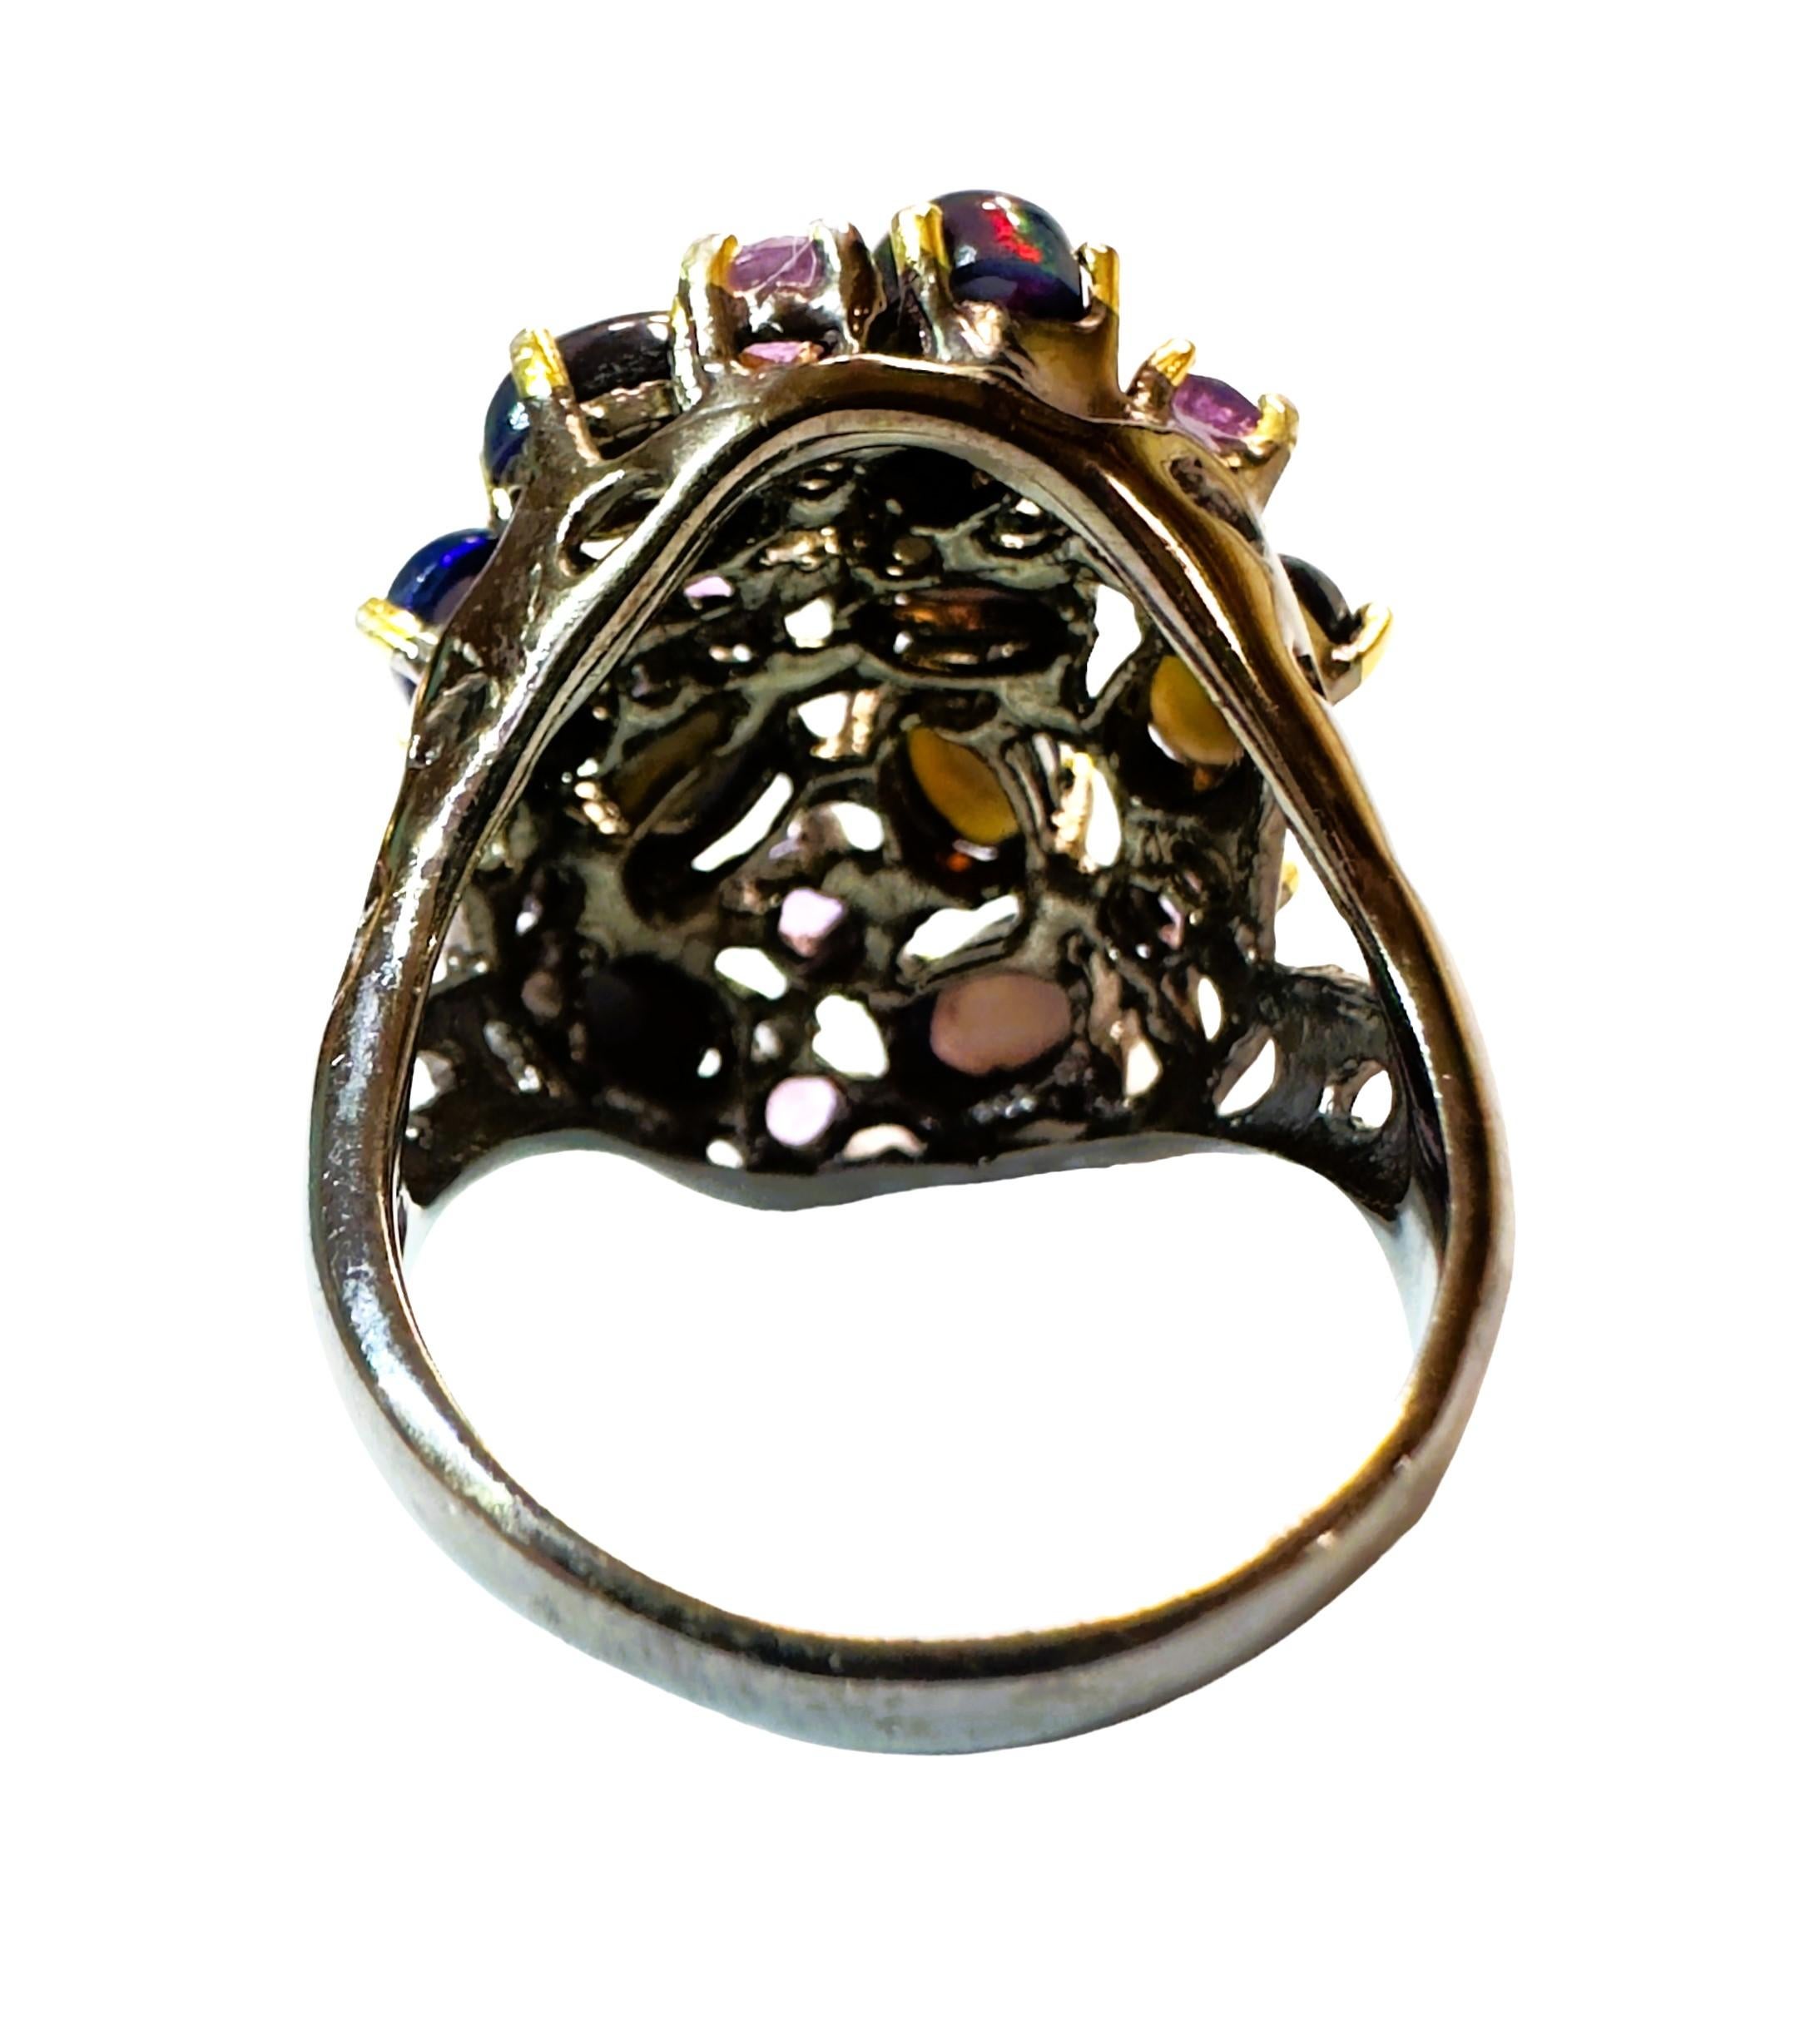 Cabochon New Handmade Ethiopian Black Opal & Amethyst Ring in Oxi-black Sterling Silver For Sale